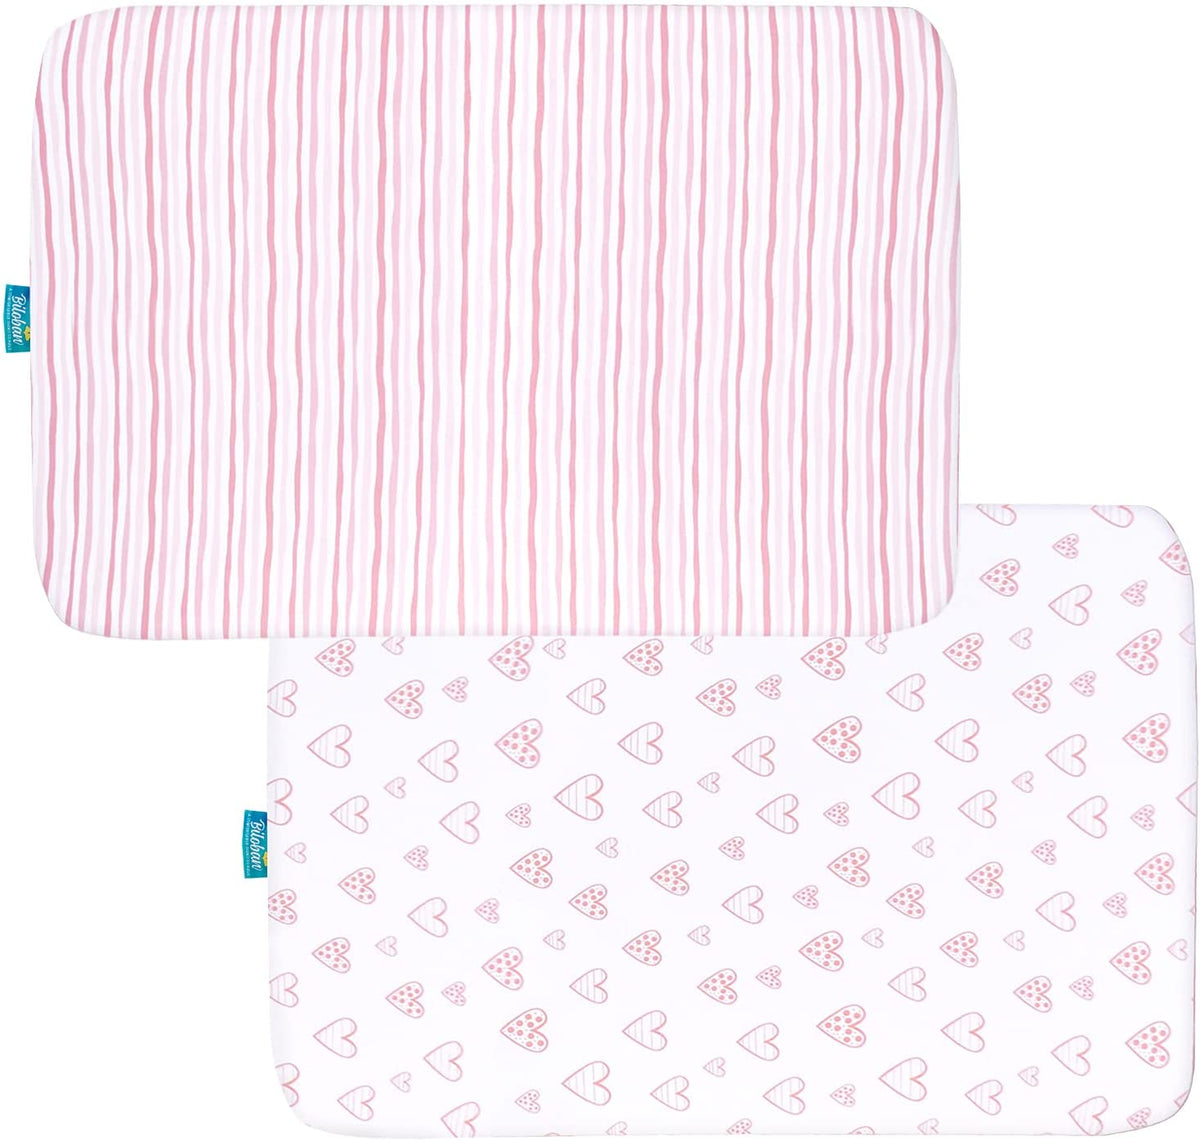  2 Pack Baby Bjorn Travel Crib Fitted Sheets Compatible With Guava Lotus Dream on Me Travel Crib Light Playard Fits Perfectly on 24 x 42” Mattress Without Bunching Up Snuggly Soft Jersey Cotton 